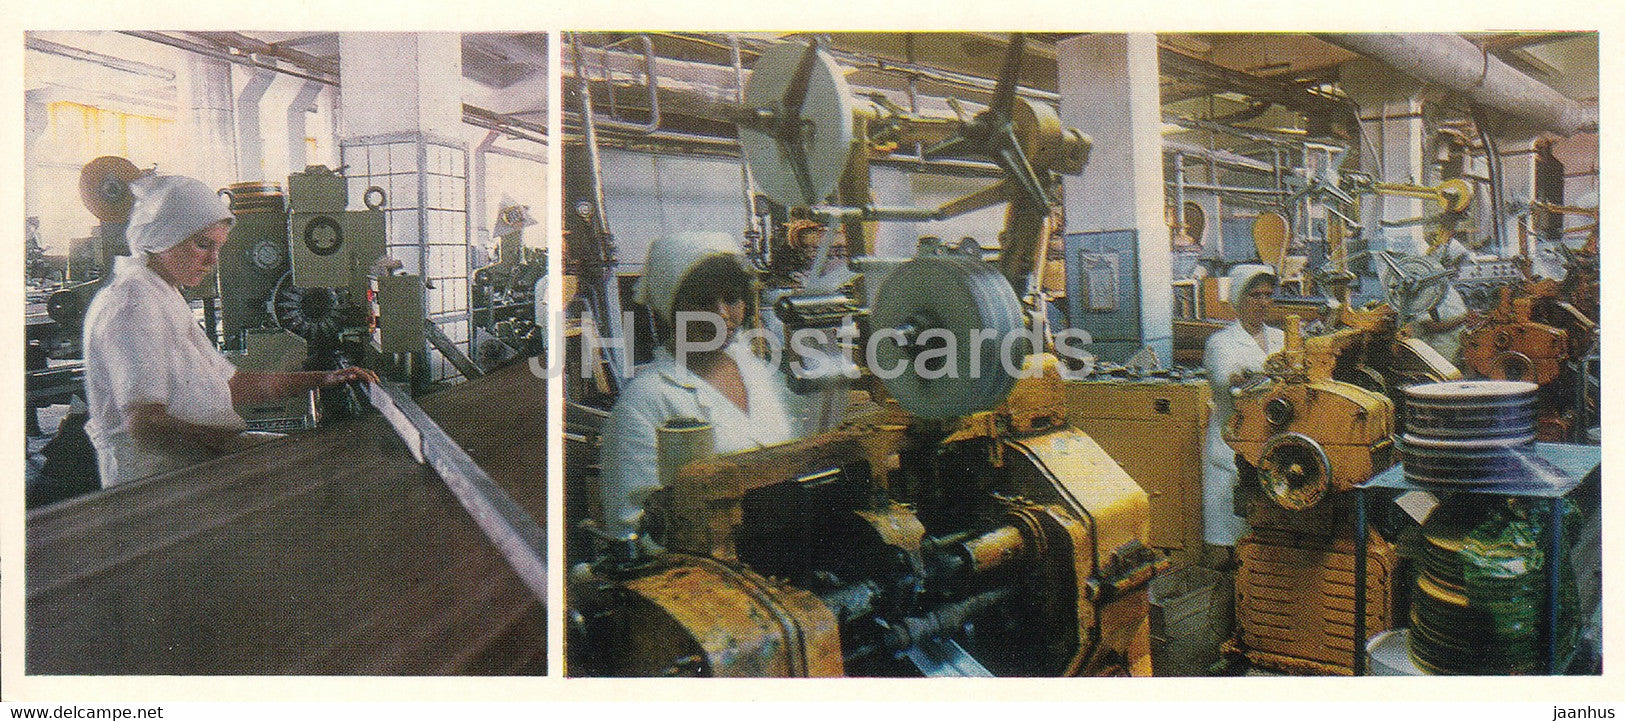 Kostanay - In the shops of a confectionery factory - 1985 - Kazakhstan USSR - unused - JH Postcards